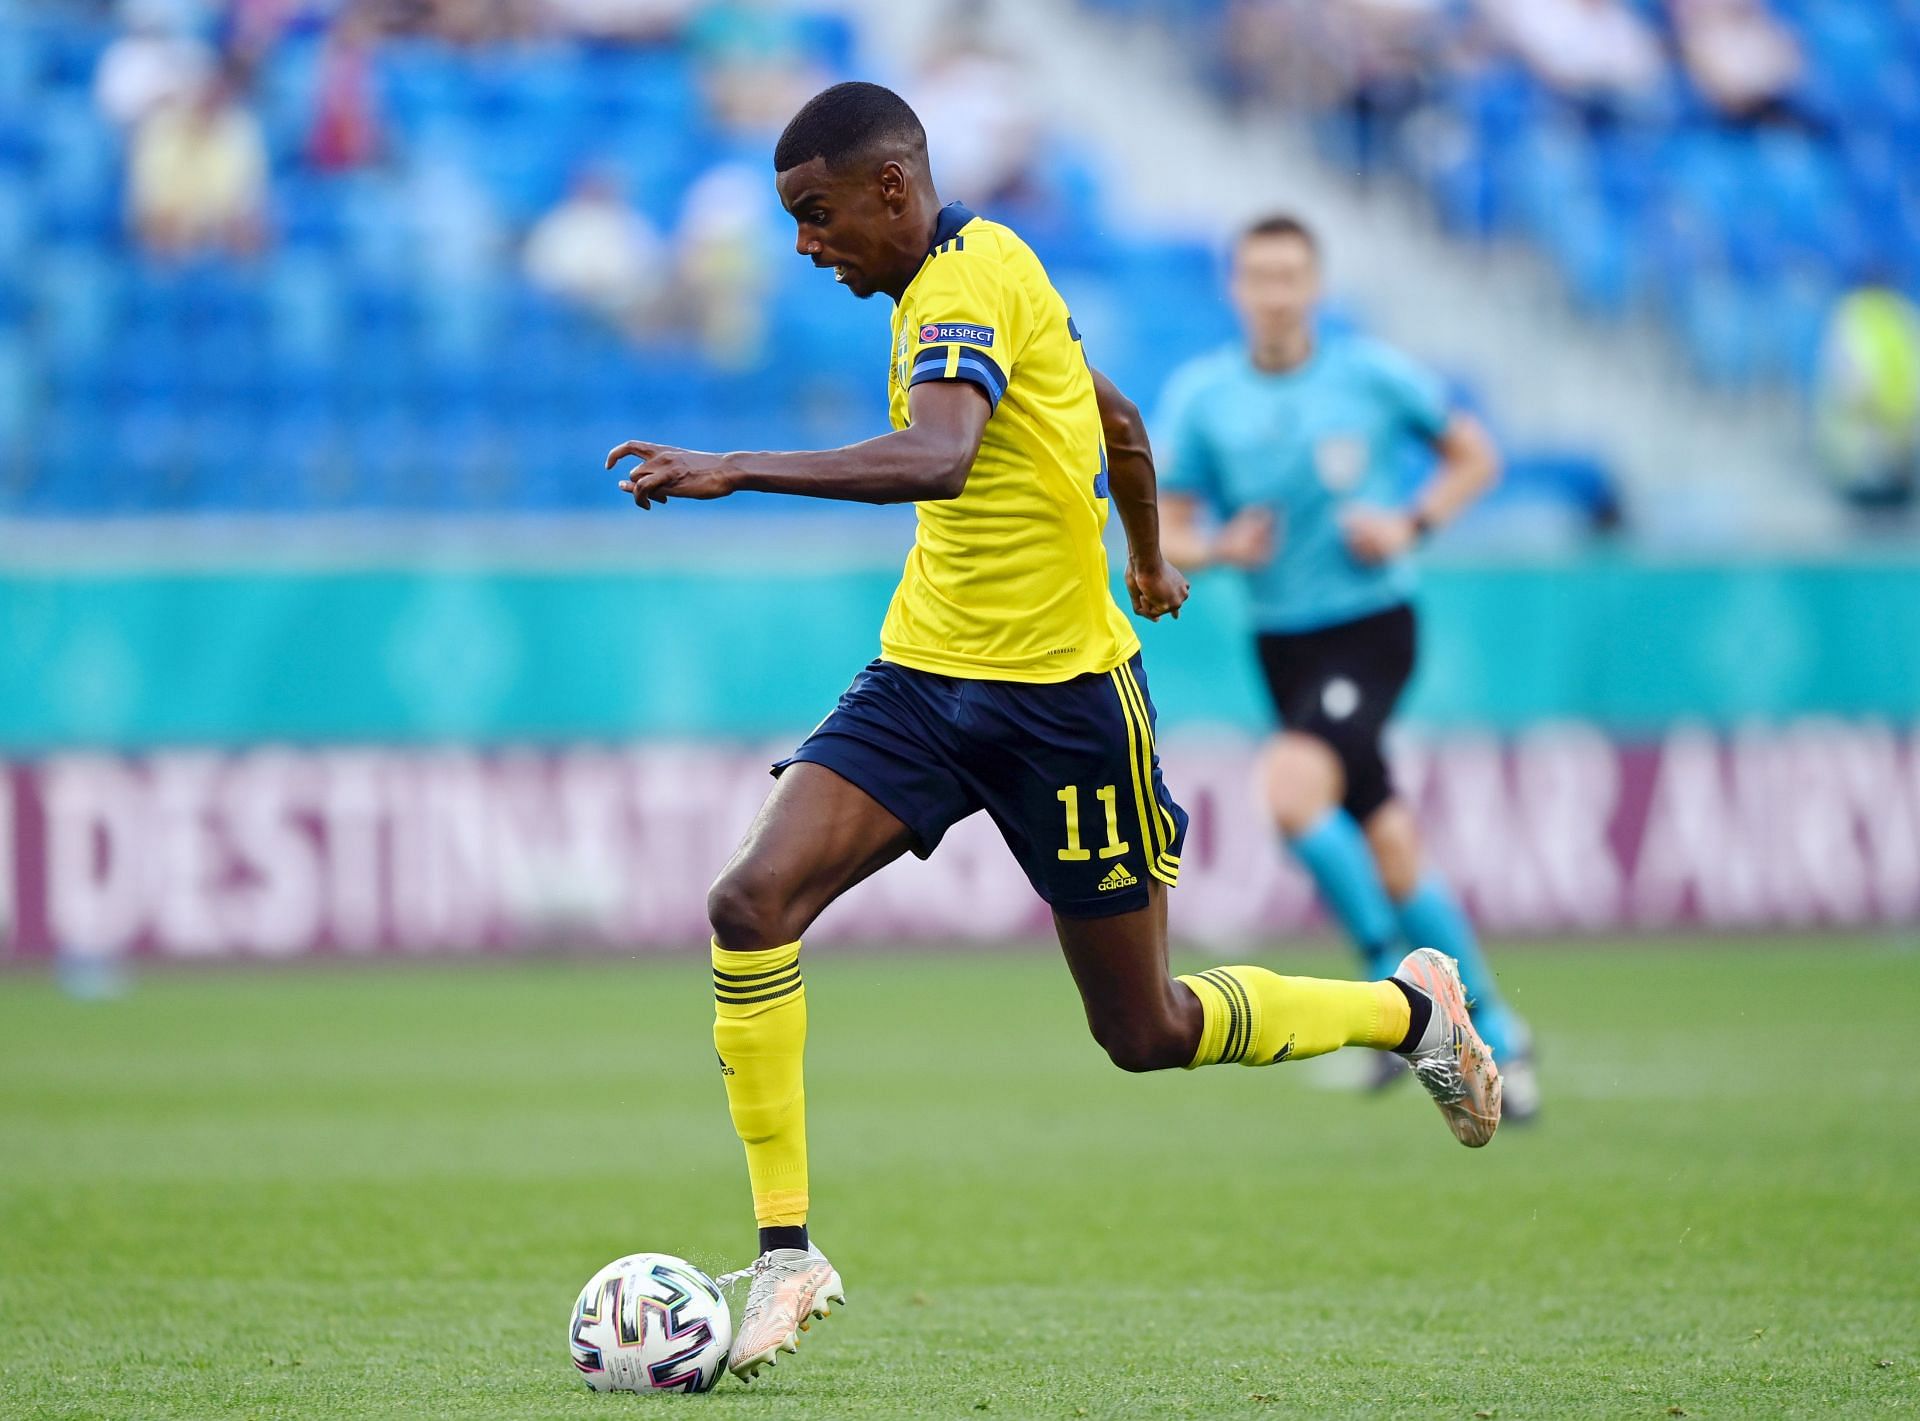 Arsenal have received a setback in their pursuit of Alexander Isak.